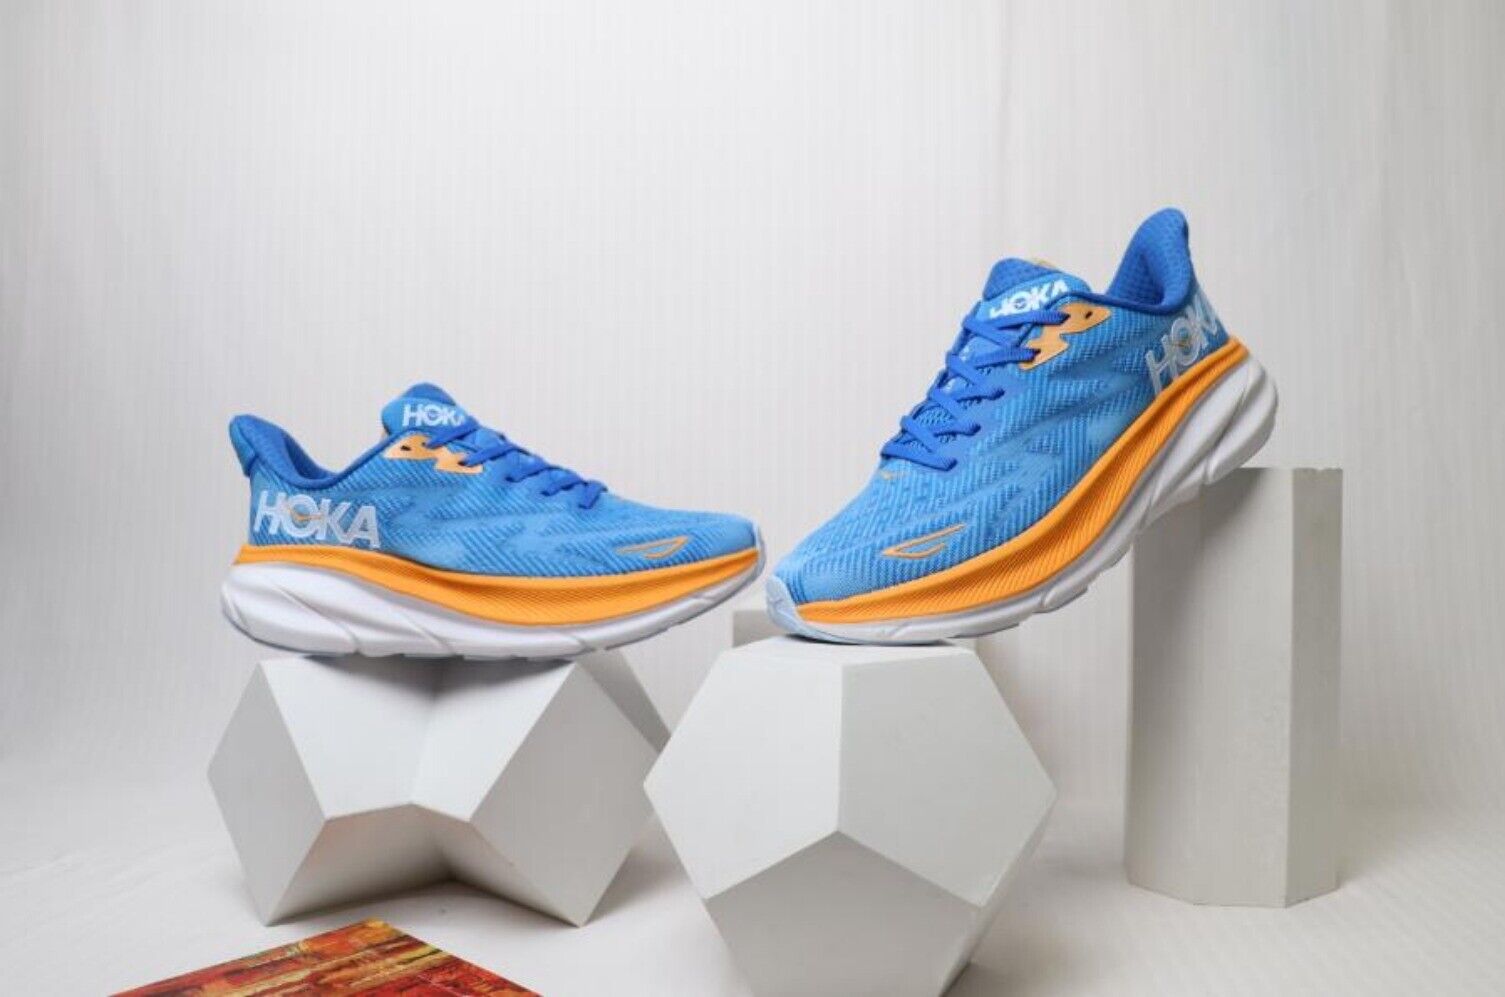 New HOKA ONE ONE Clifton 9 Running Shoes - Sky Blue, Comfortable, Women's Sizes